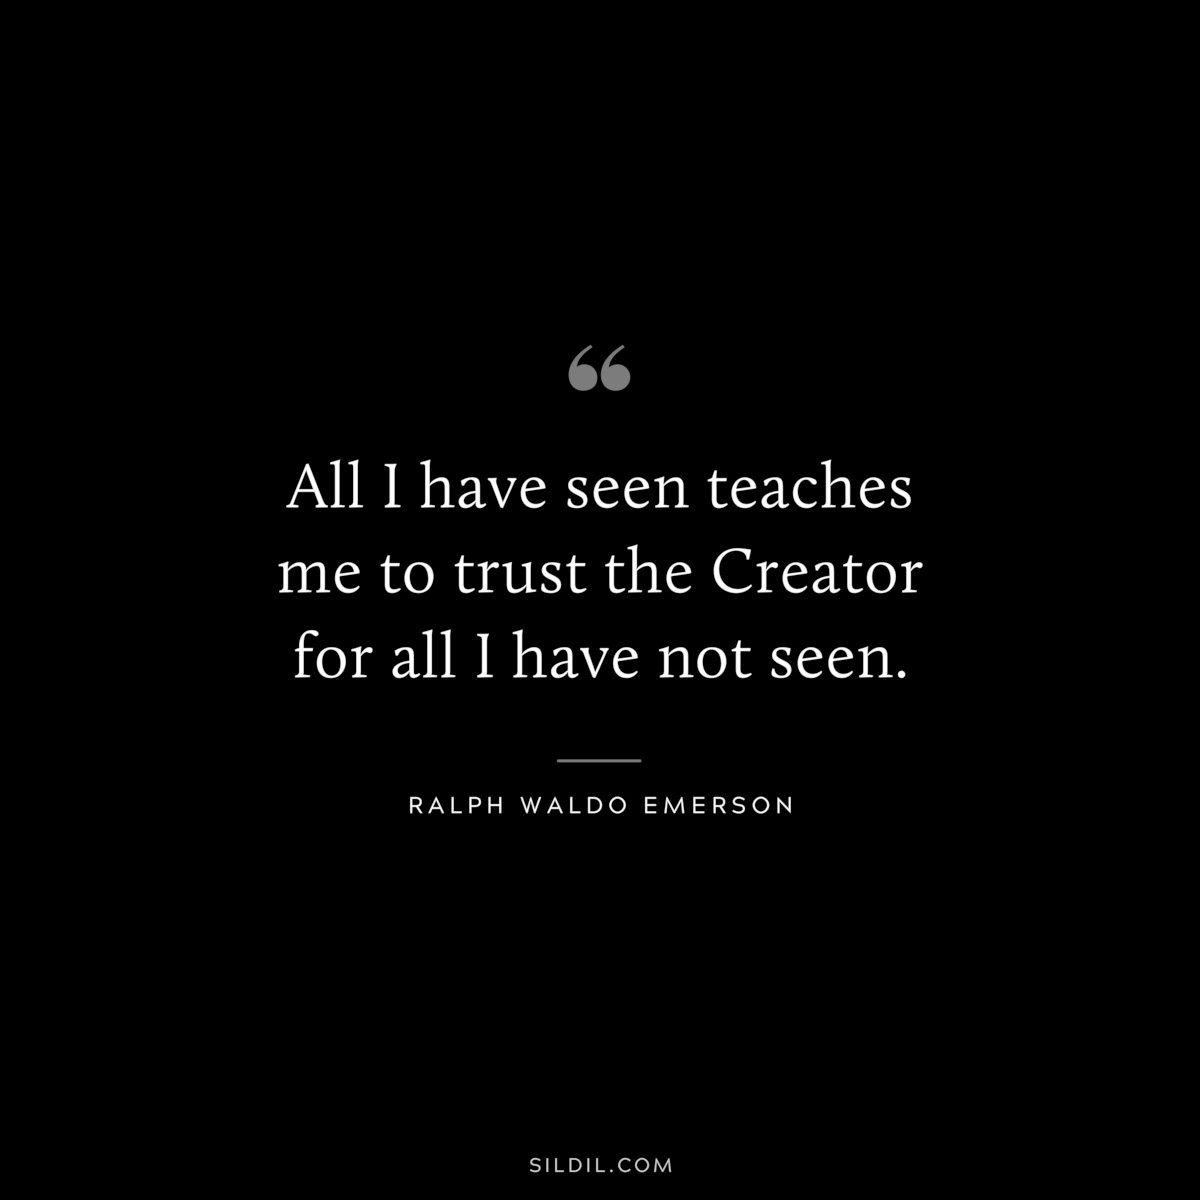 All I have seen teaches me to trust the Creator for all I have not seen. — Ralph Waldo Emerson